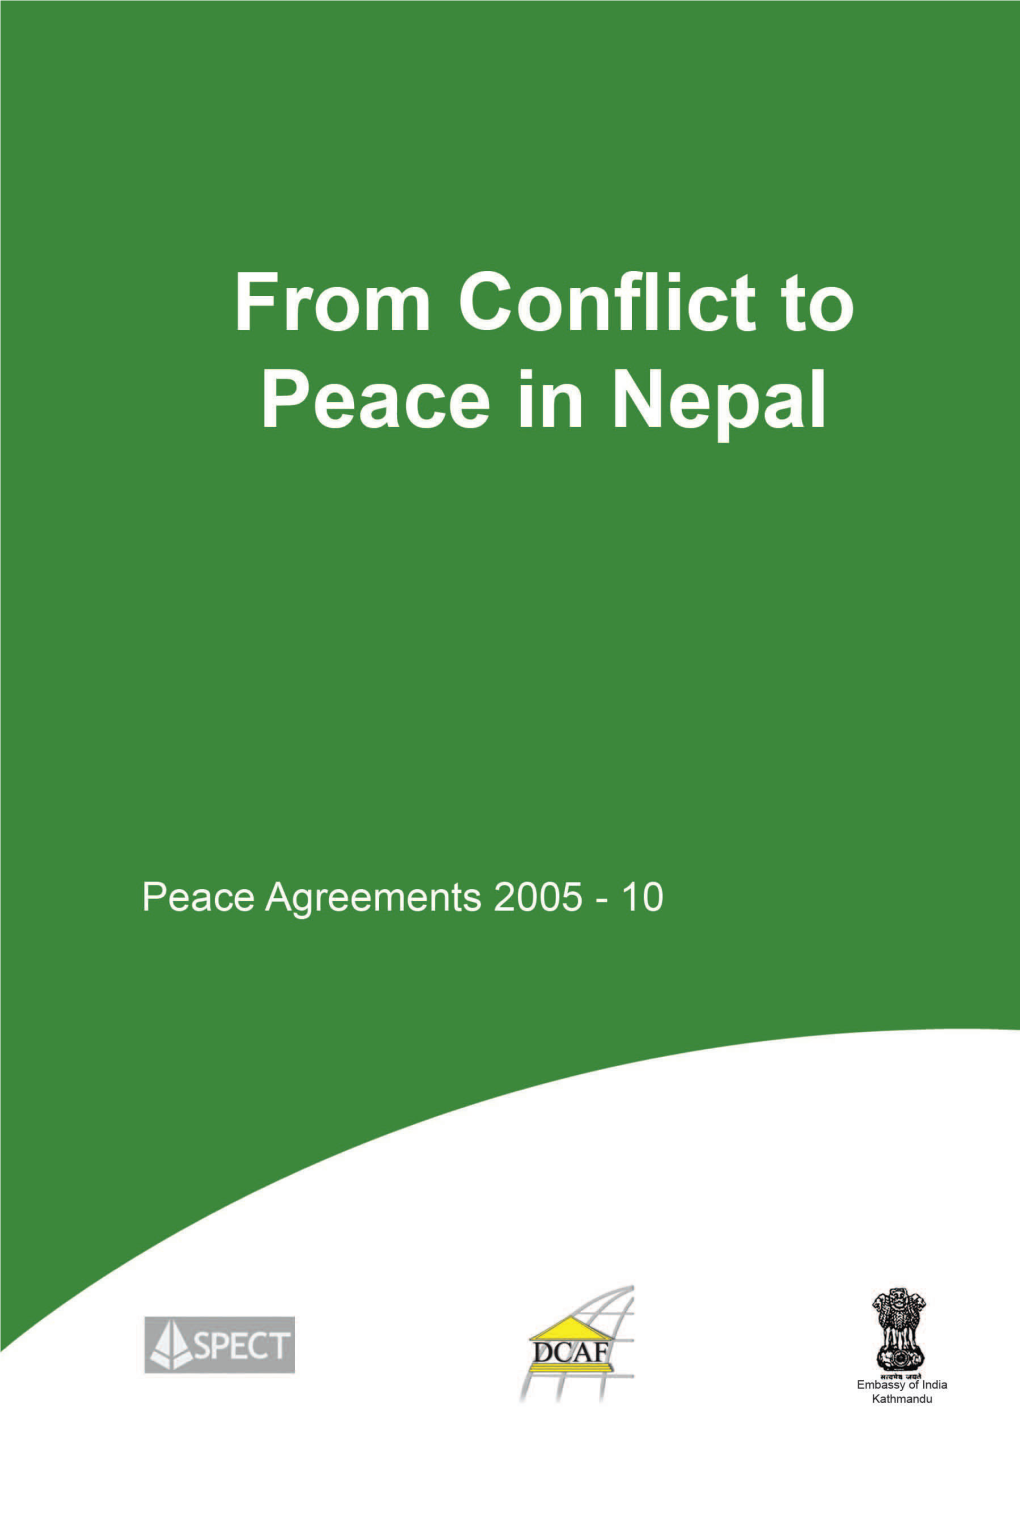 From Conflict to Peace in Nepal